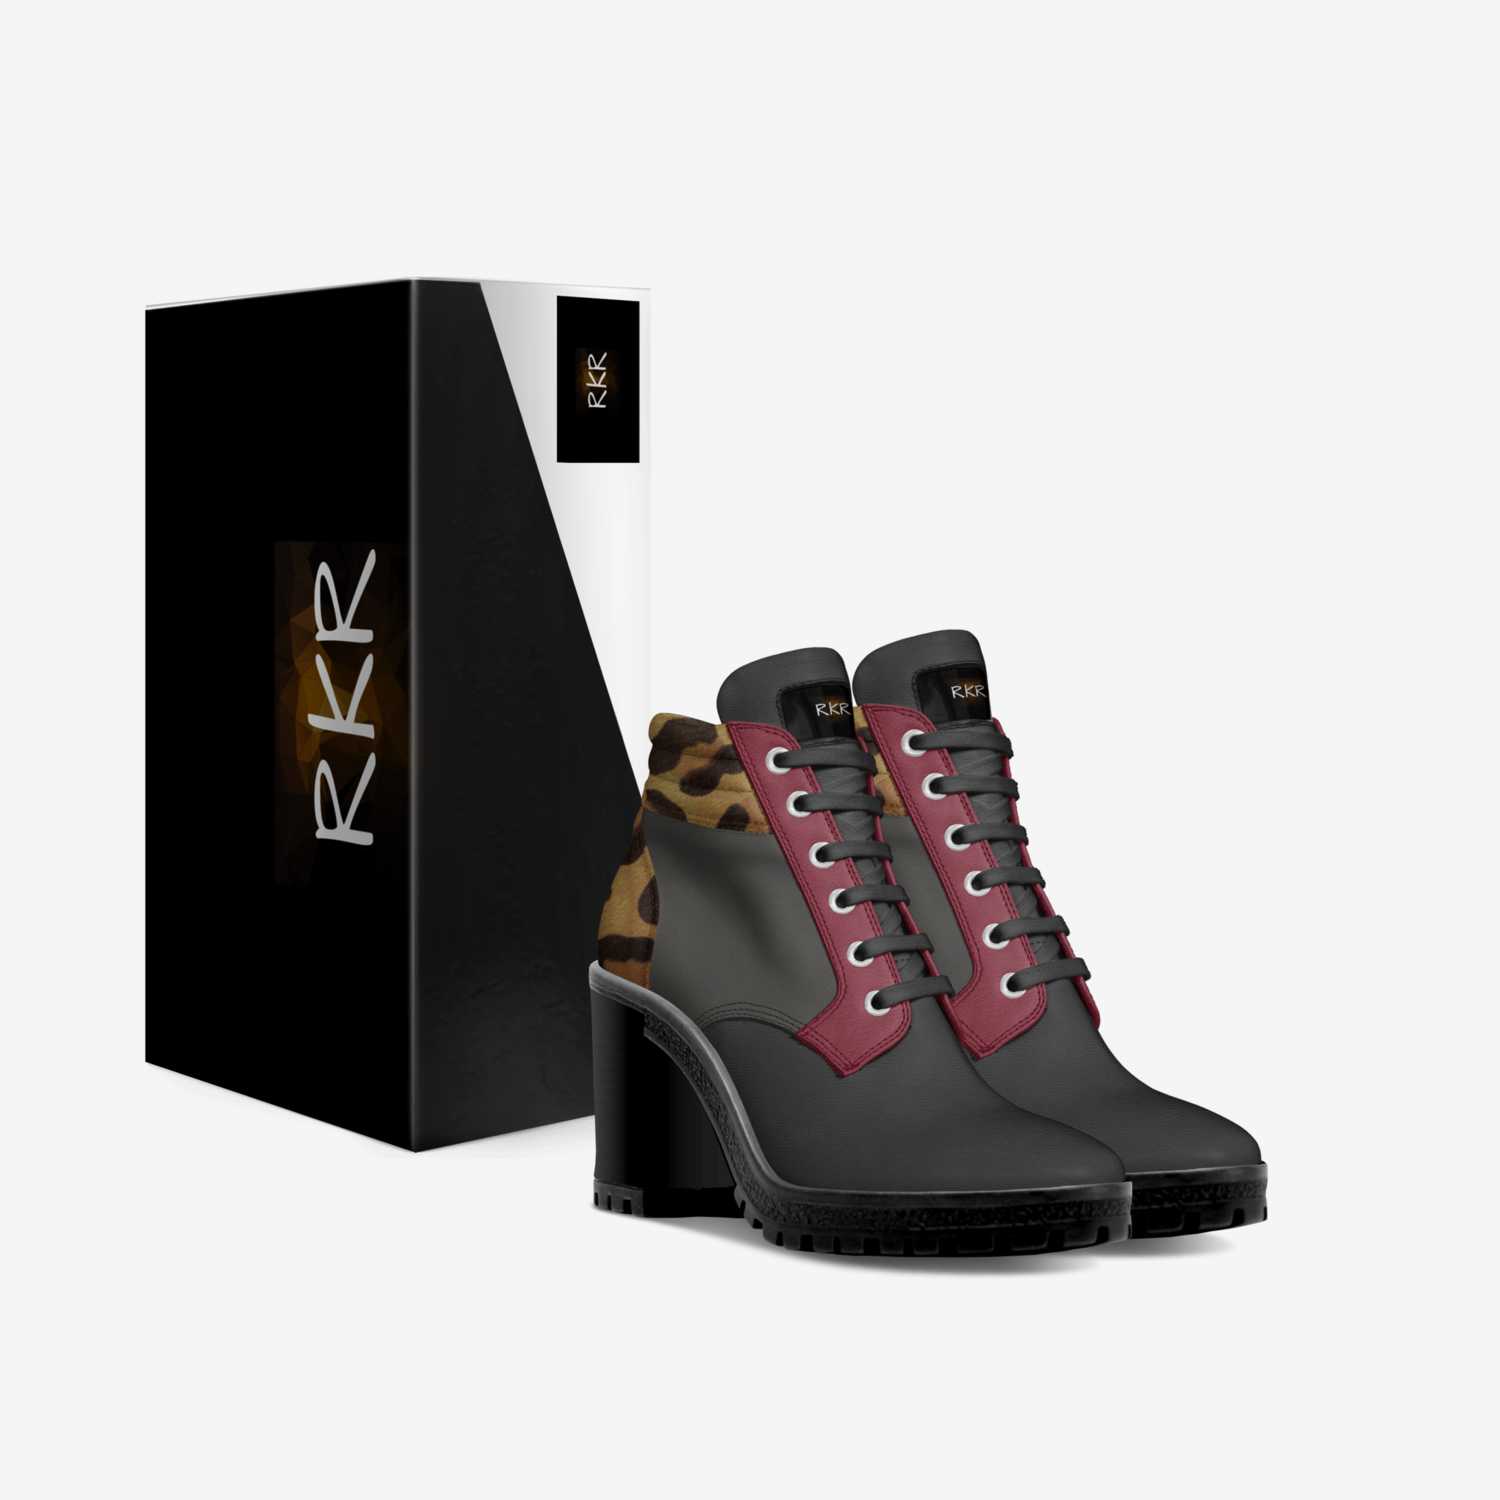 RKR  custom made in Italy shoes by Marci Wiser | Box view